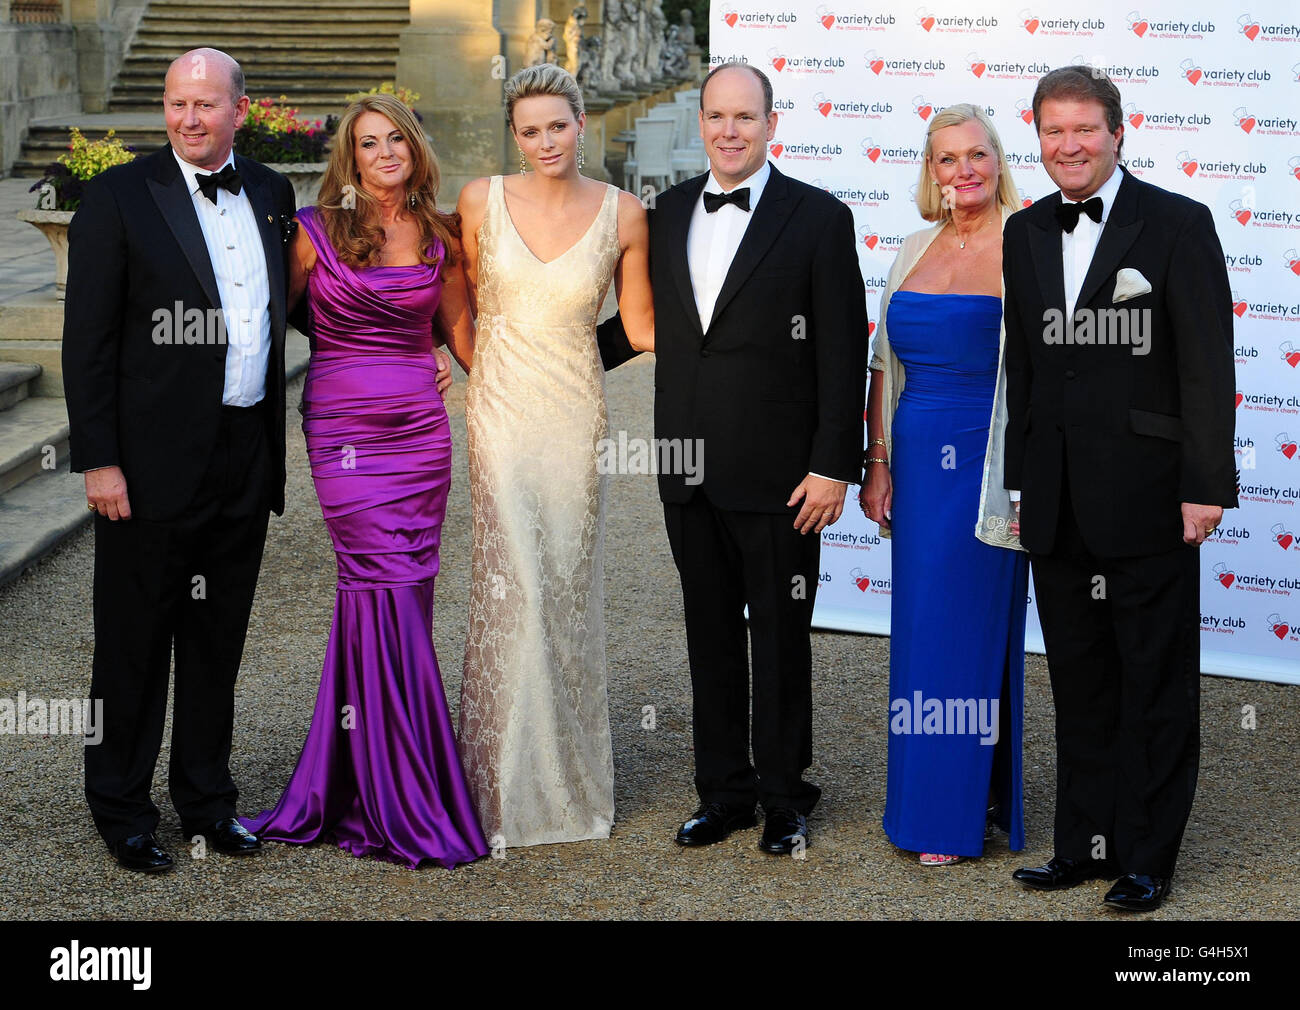 (From left to right) Chairman of the Variety Club David Wilson with wife Gail, Princess Charlene and husband Prince Albert II of Monaco and Robina and husband Stephen Bolton, at Harewood Hall in Leeds, where the 50th anniversary of the Variety Club is being celebrated. Stock Photo